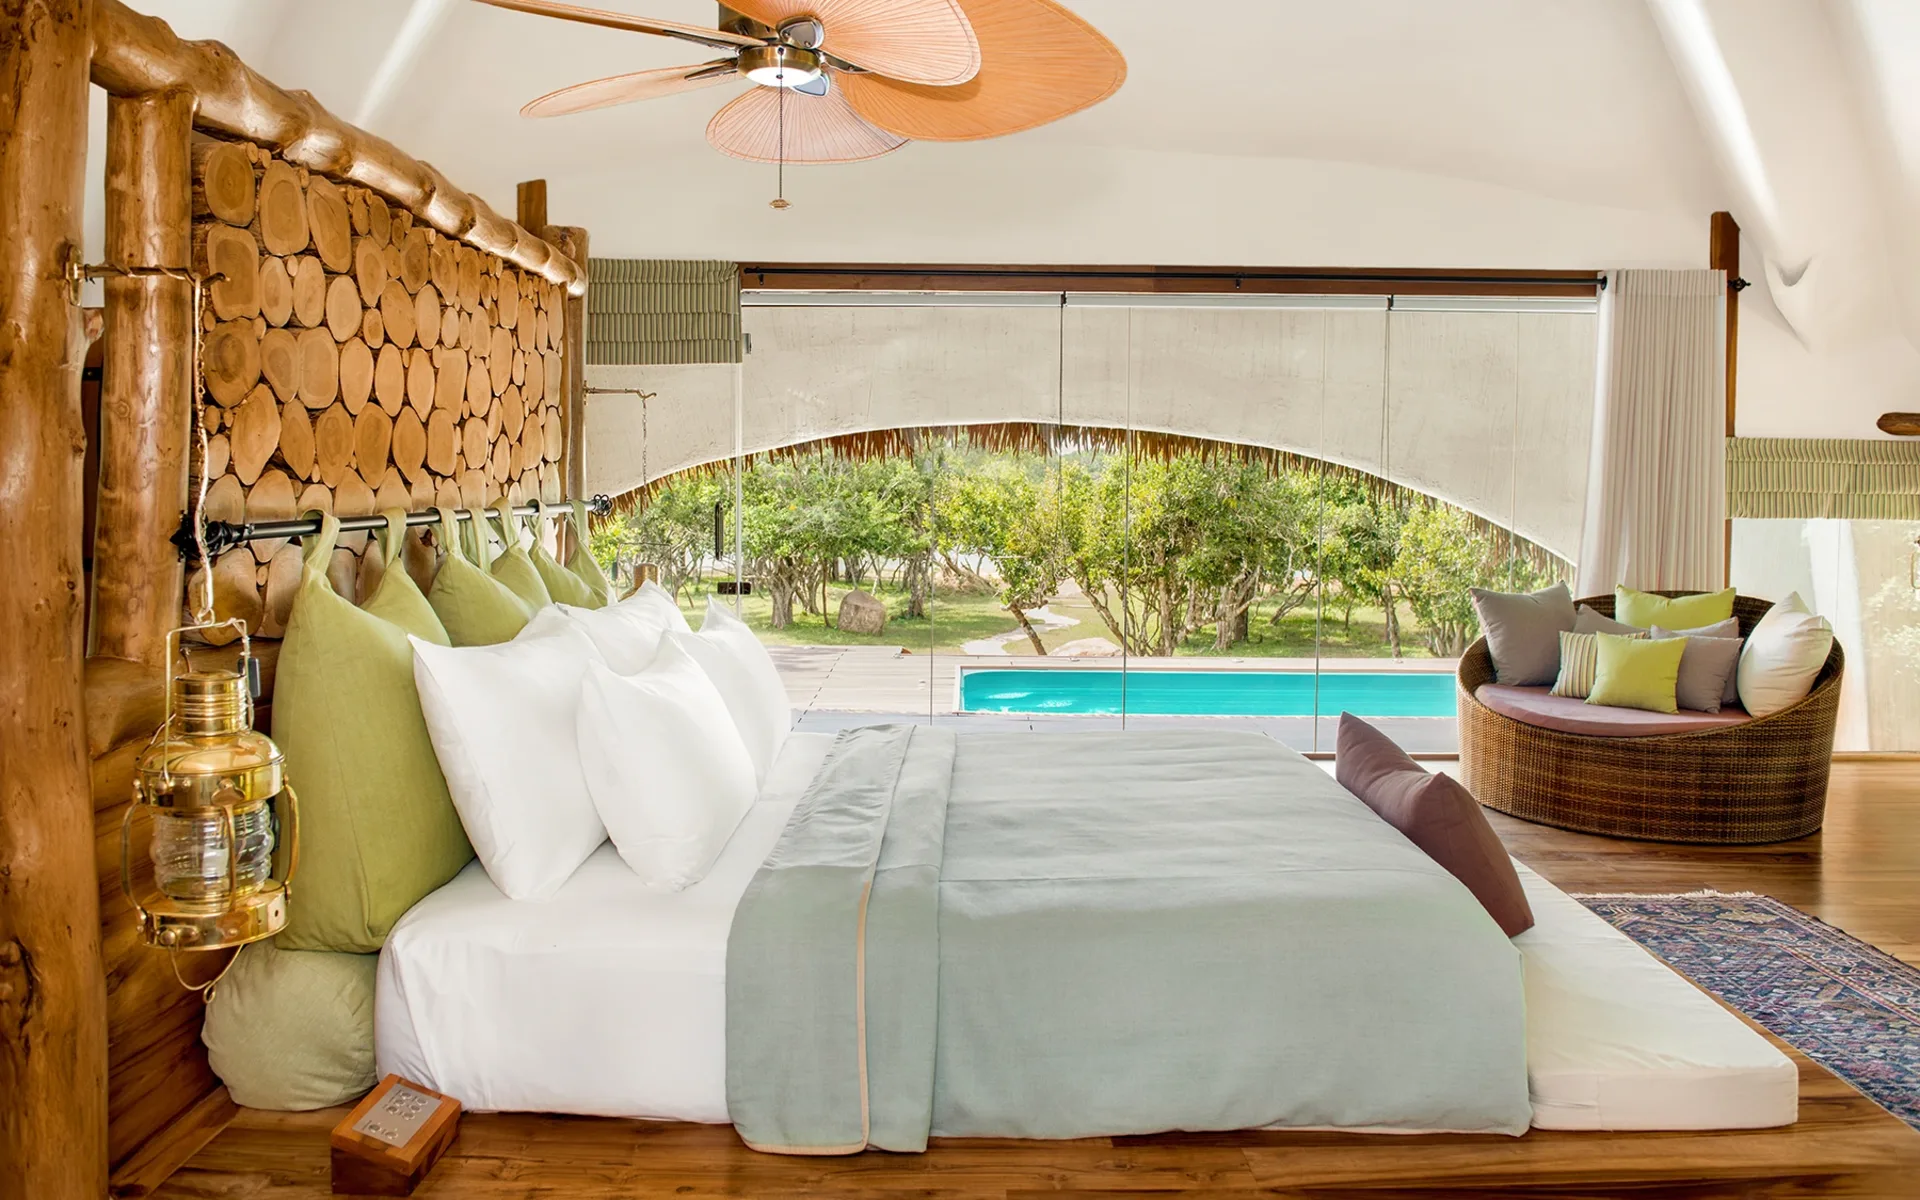 A double bed surrounded by a chair and views of the pool.